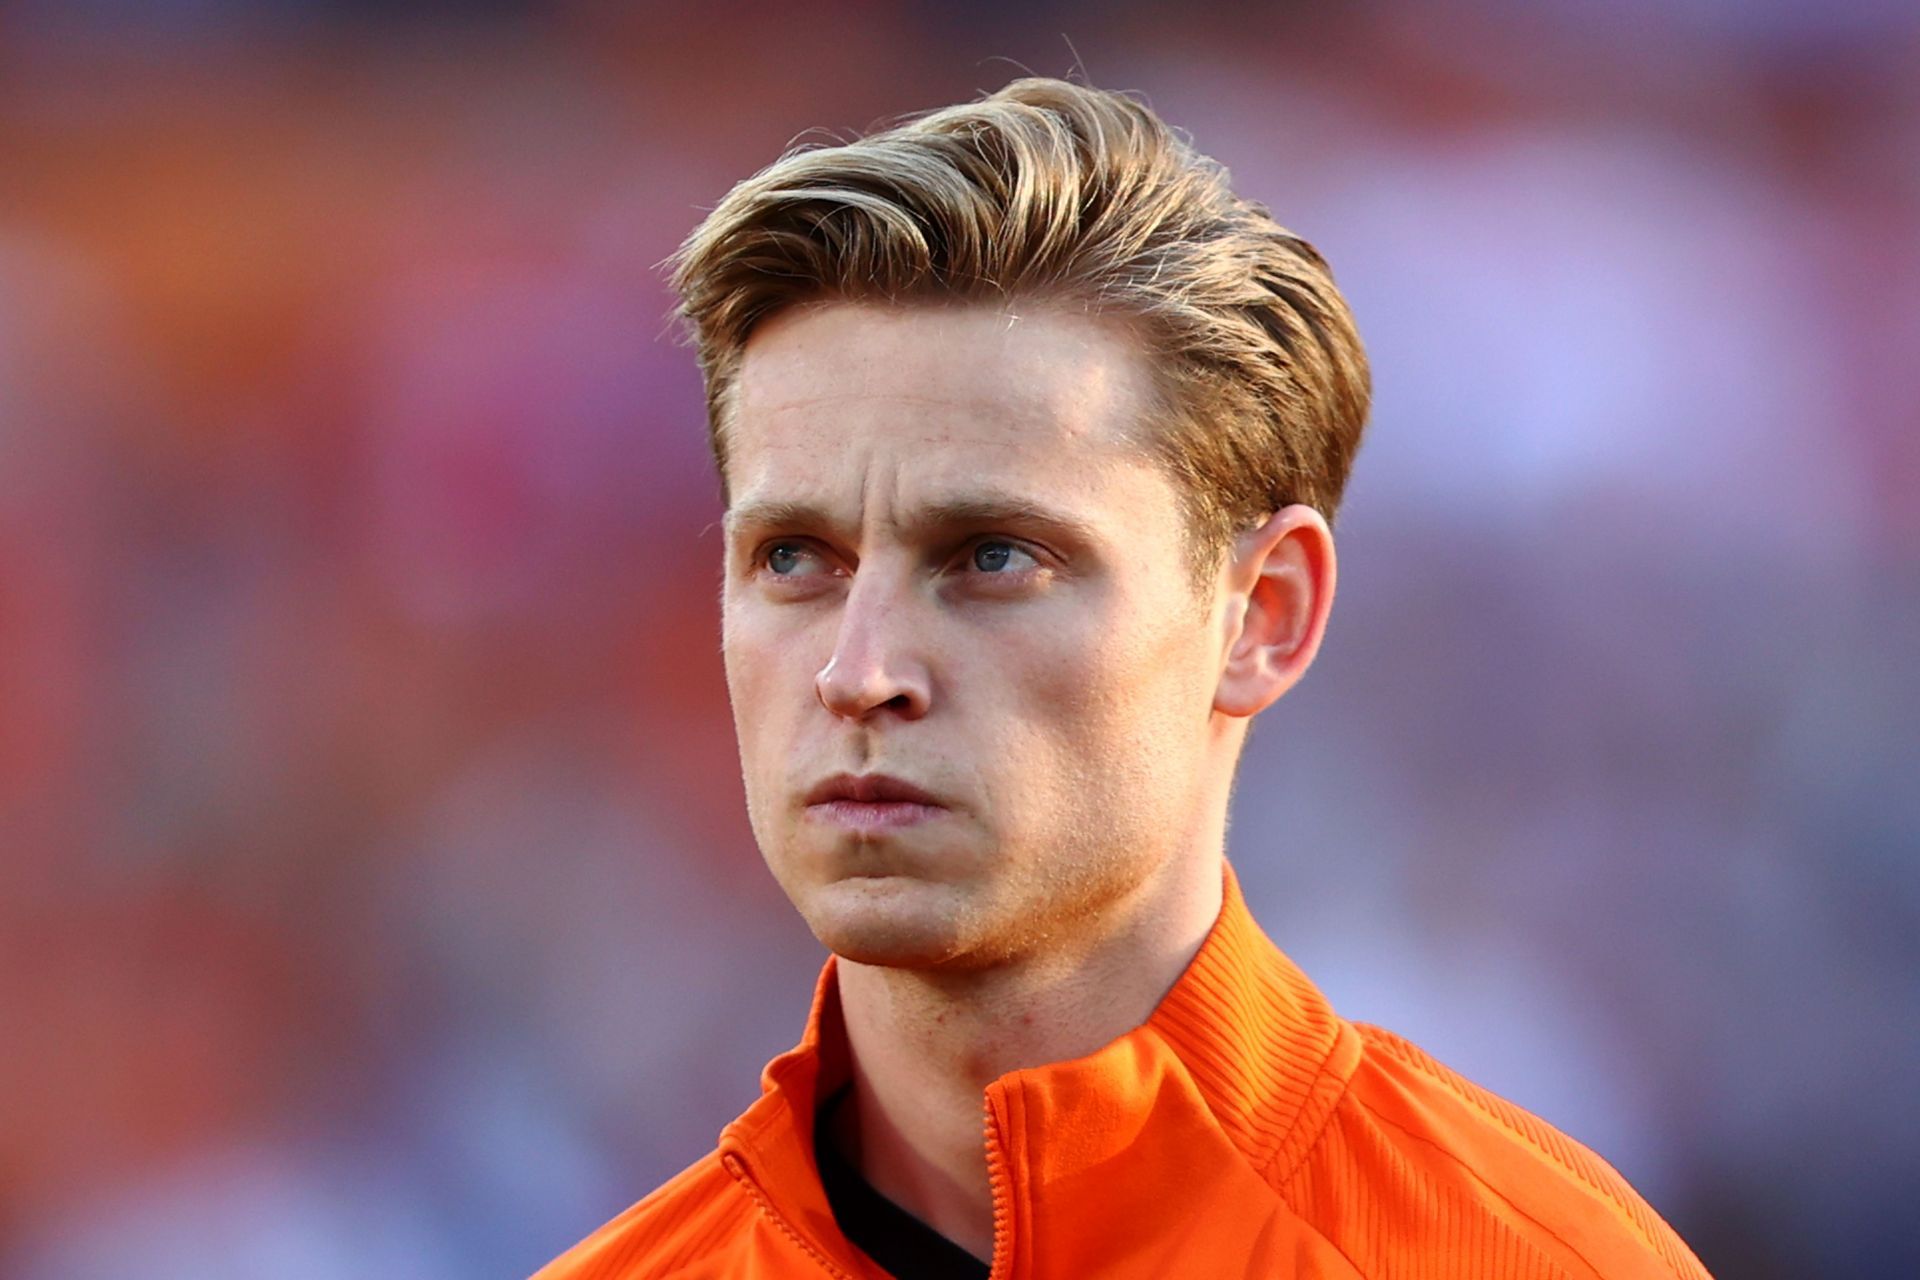 Frenkie de Jong is heavily linked with a move to Old Trafford.